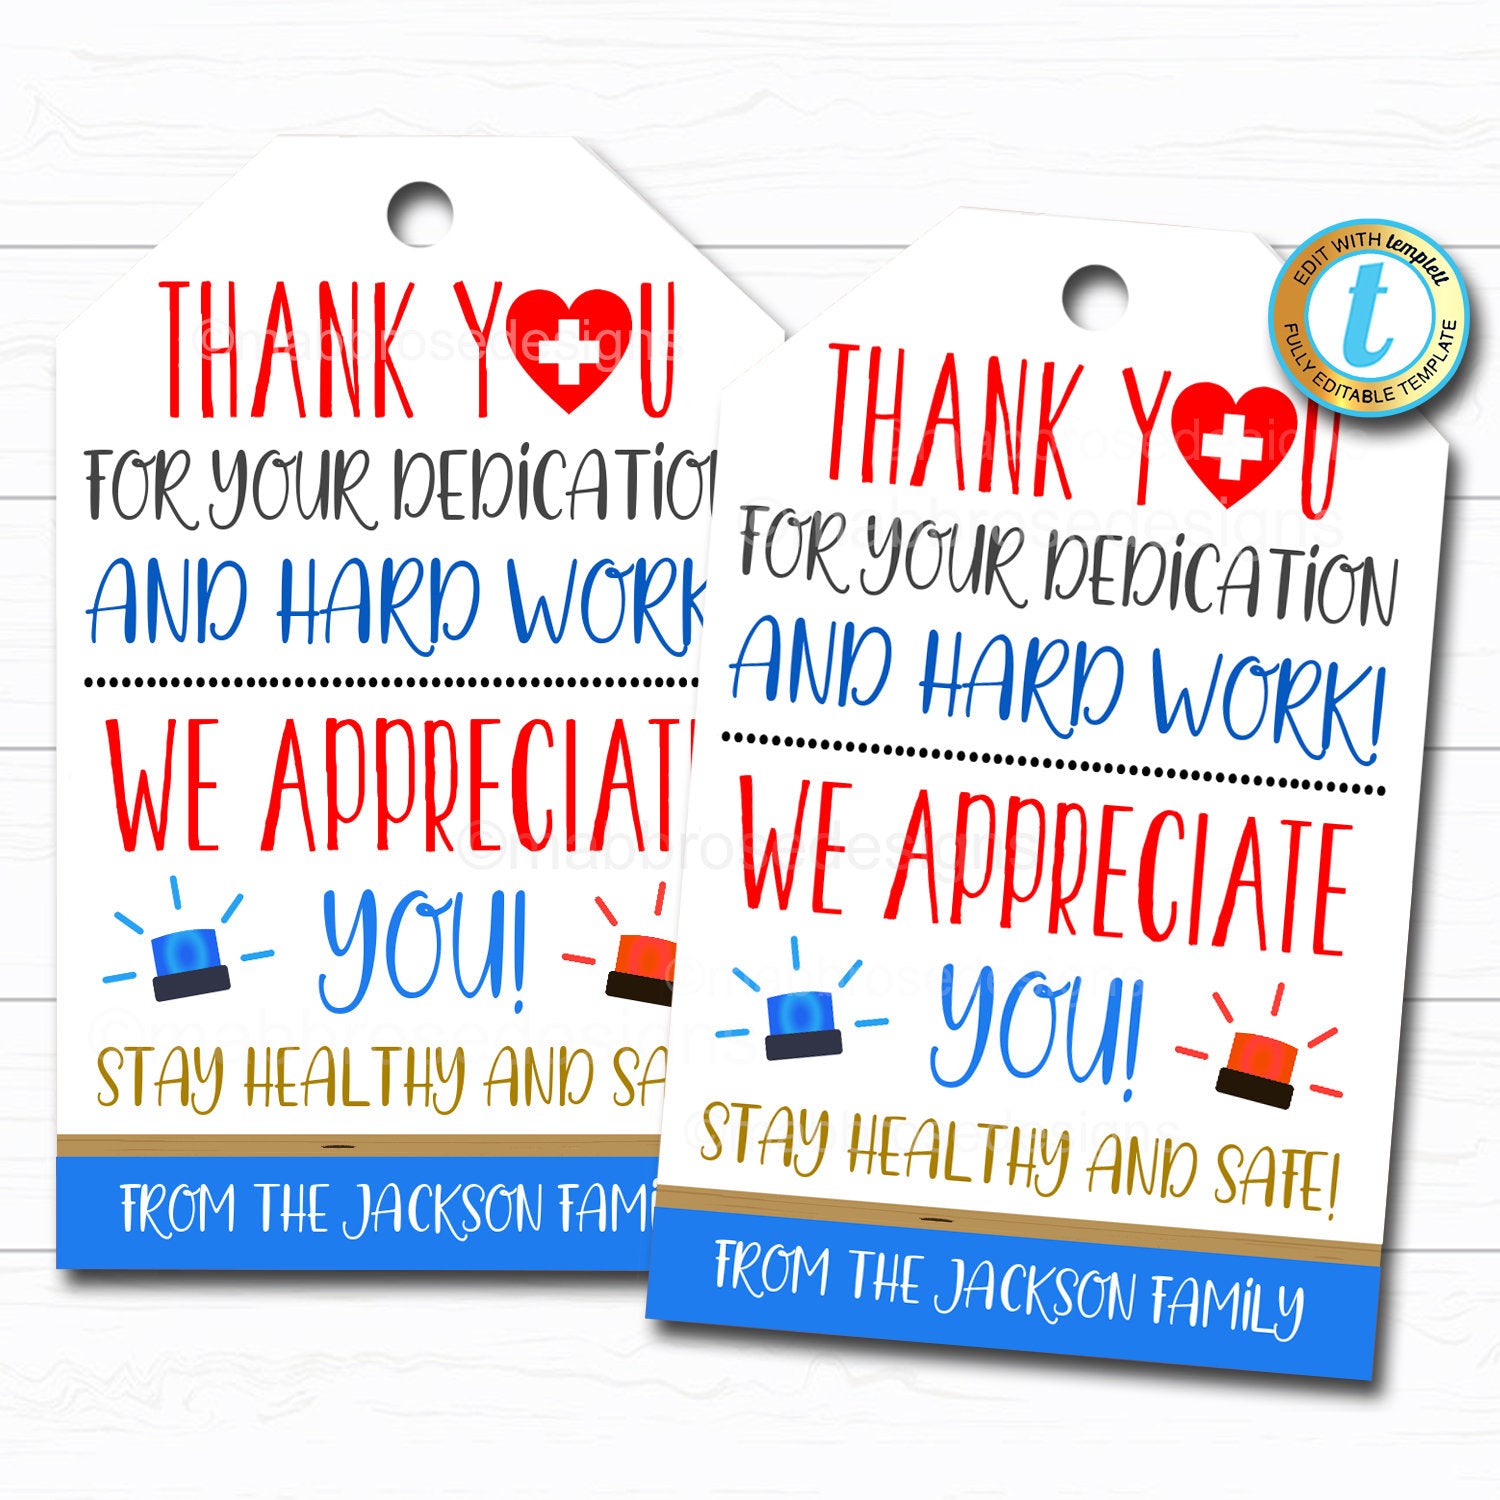 employee-appreciation-day-flyer-template-collection